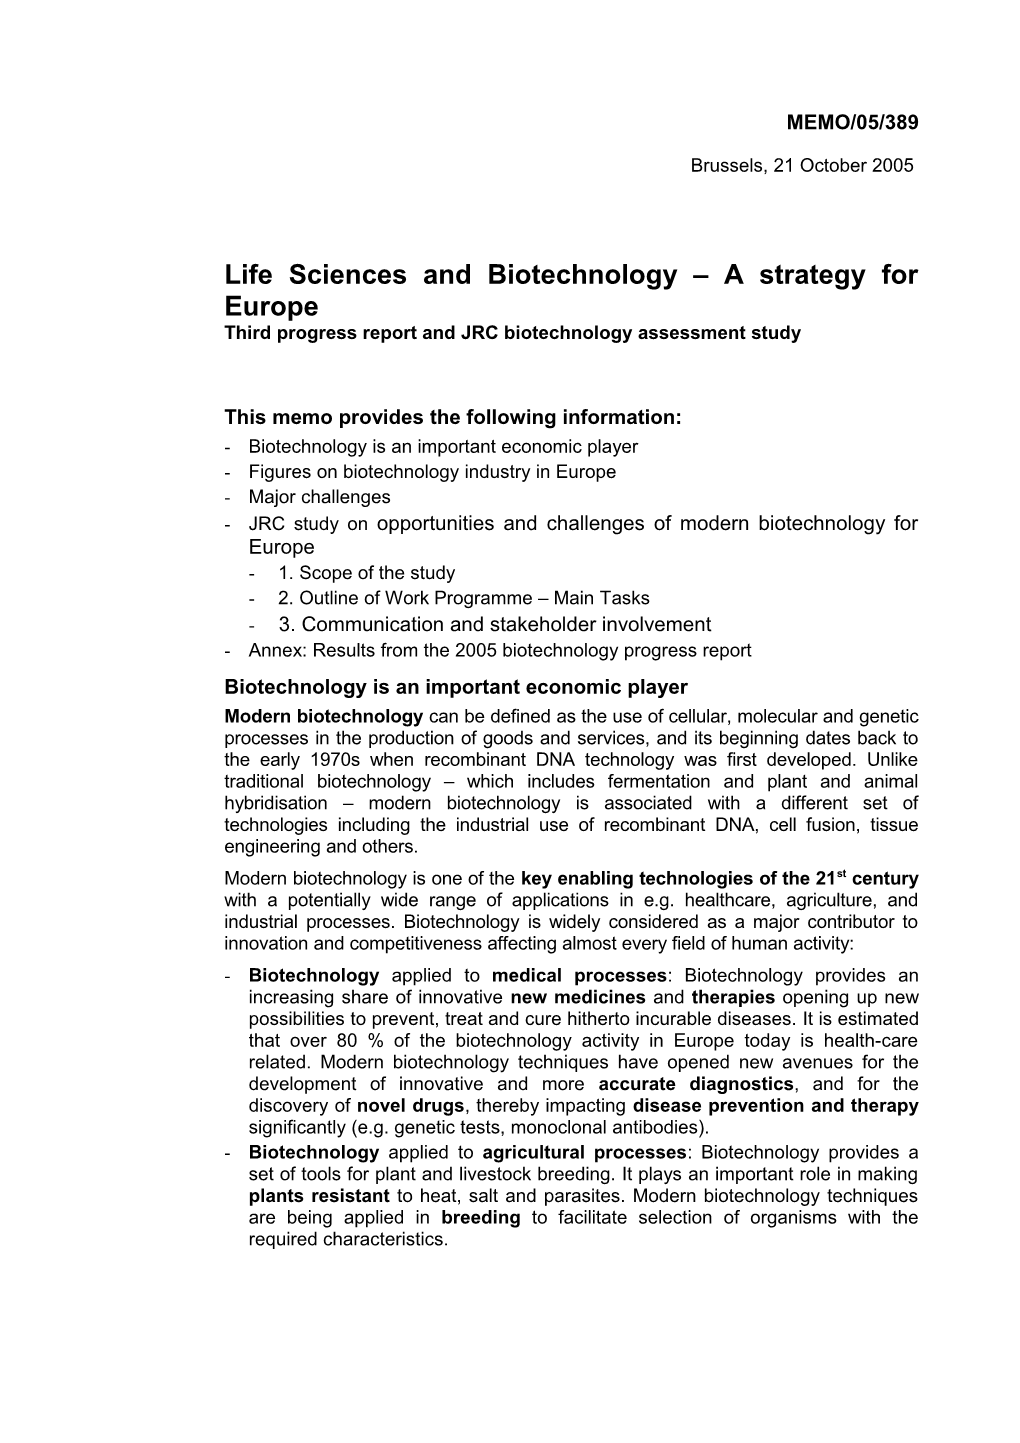 Life Sciences and Biotechnology a Strategy for Europe